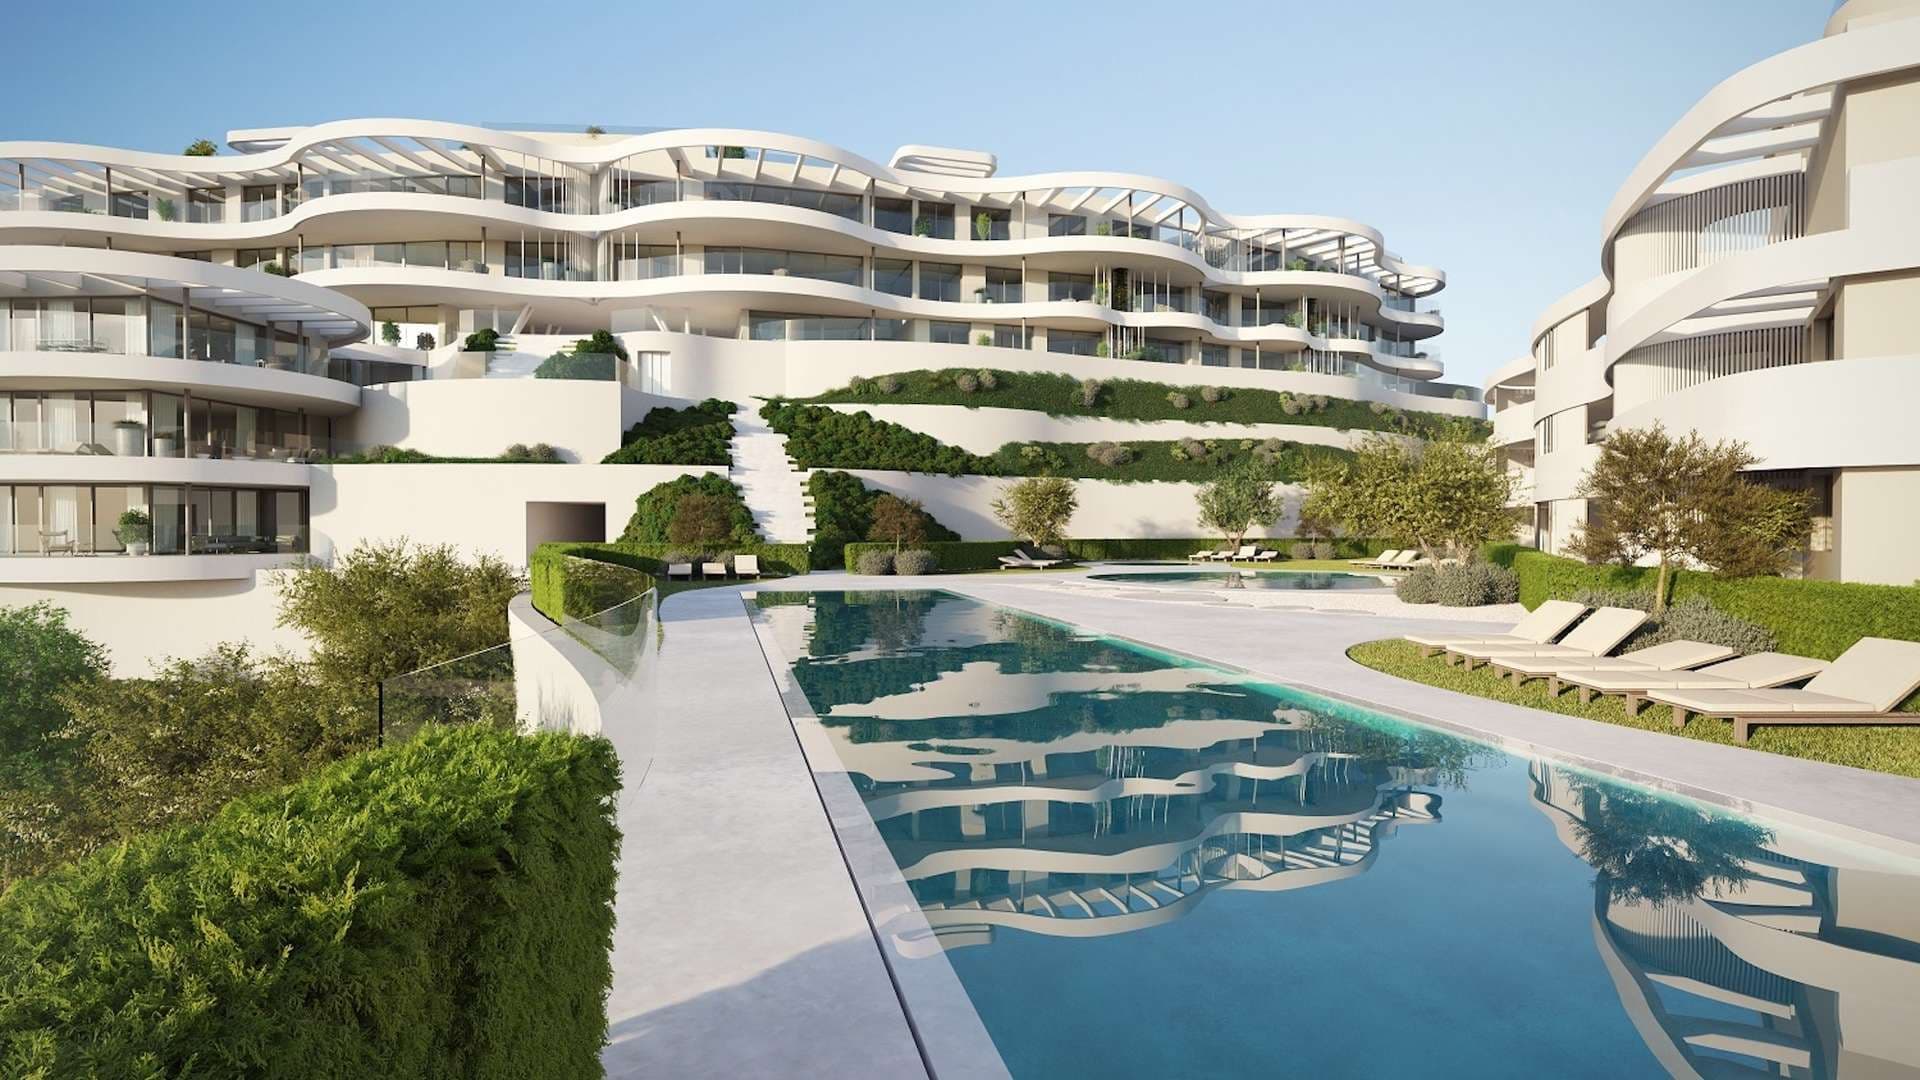 2 Bedroom Apartment For Sale The View Marbella Lp04166 1b27d32f29930500.jpg